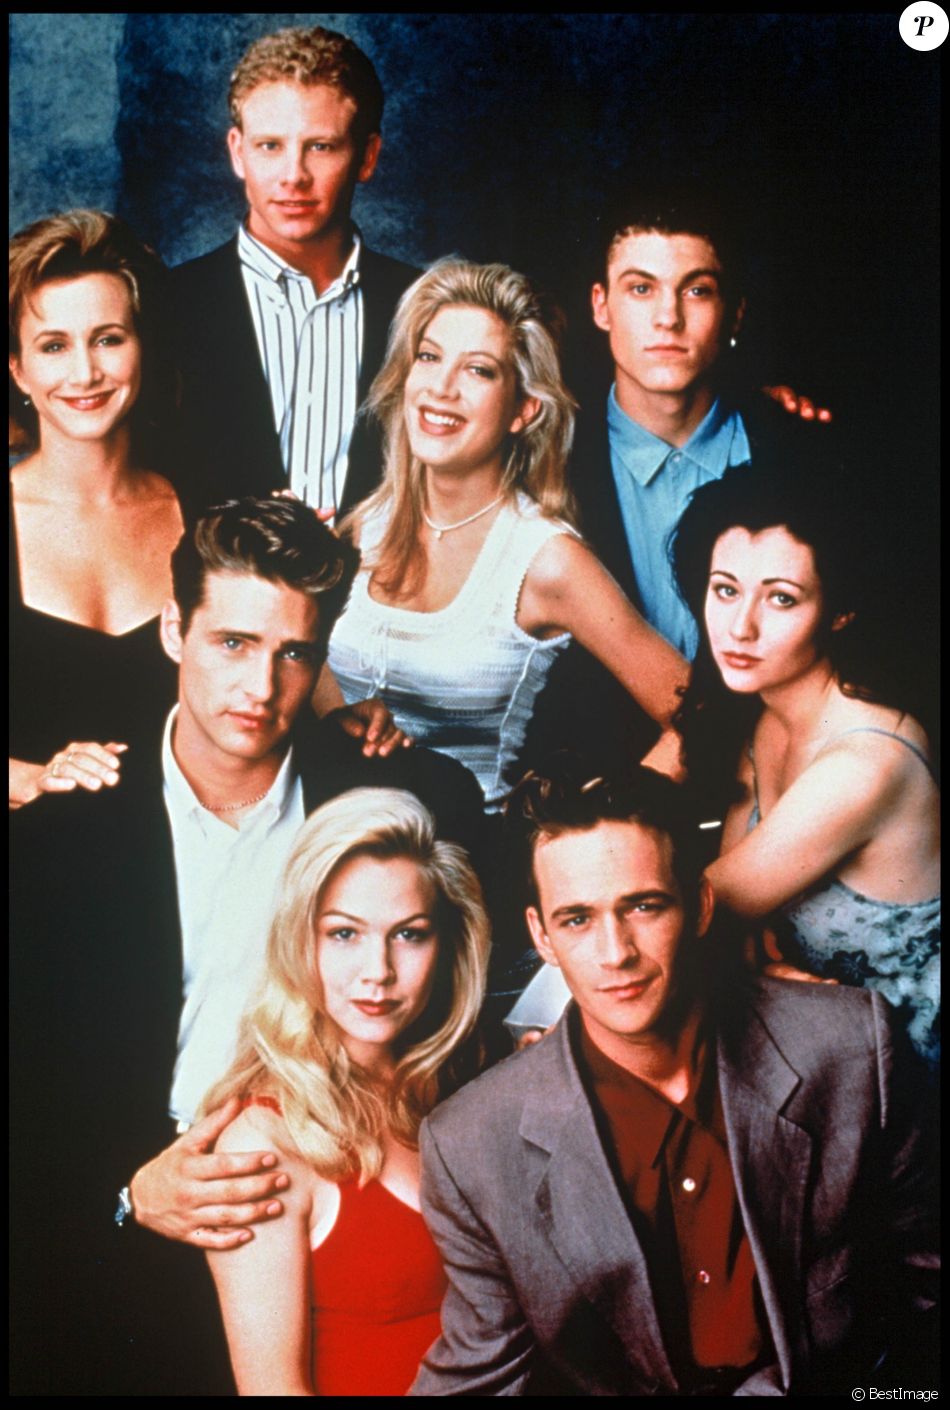 Beverly Hills 90210 Francais Photo promo de Beverly Hills 90210 - Purepeople